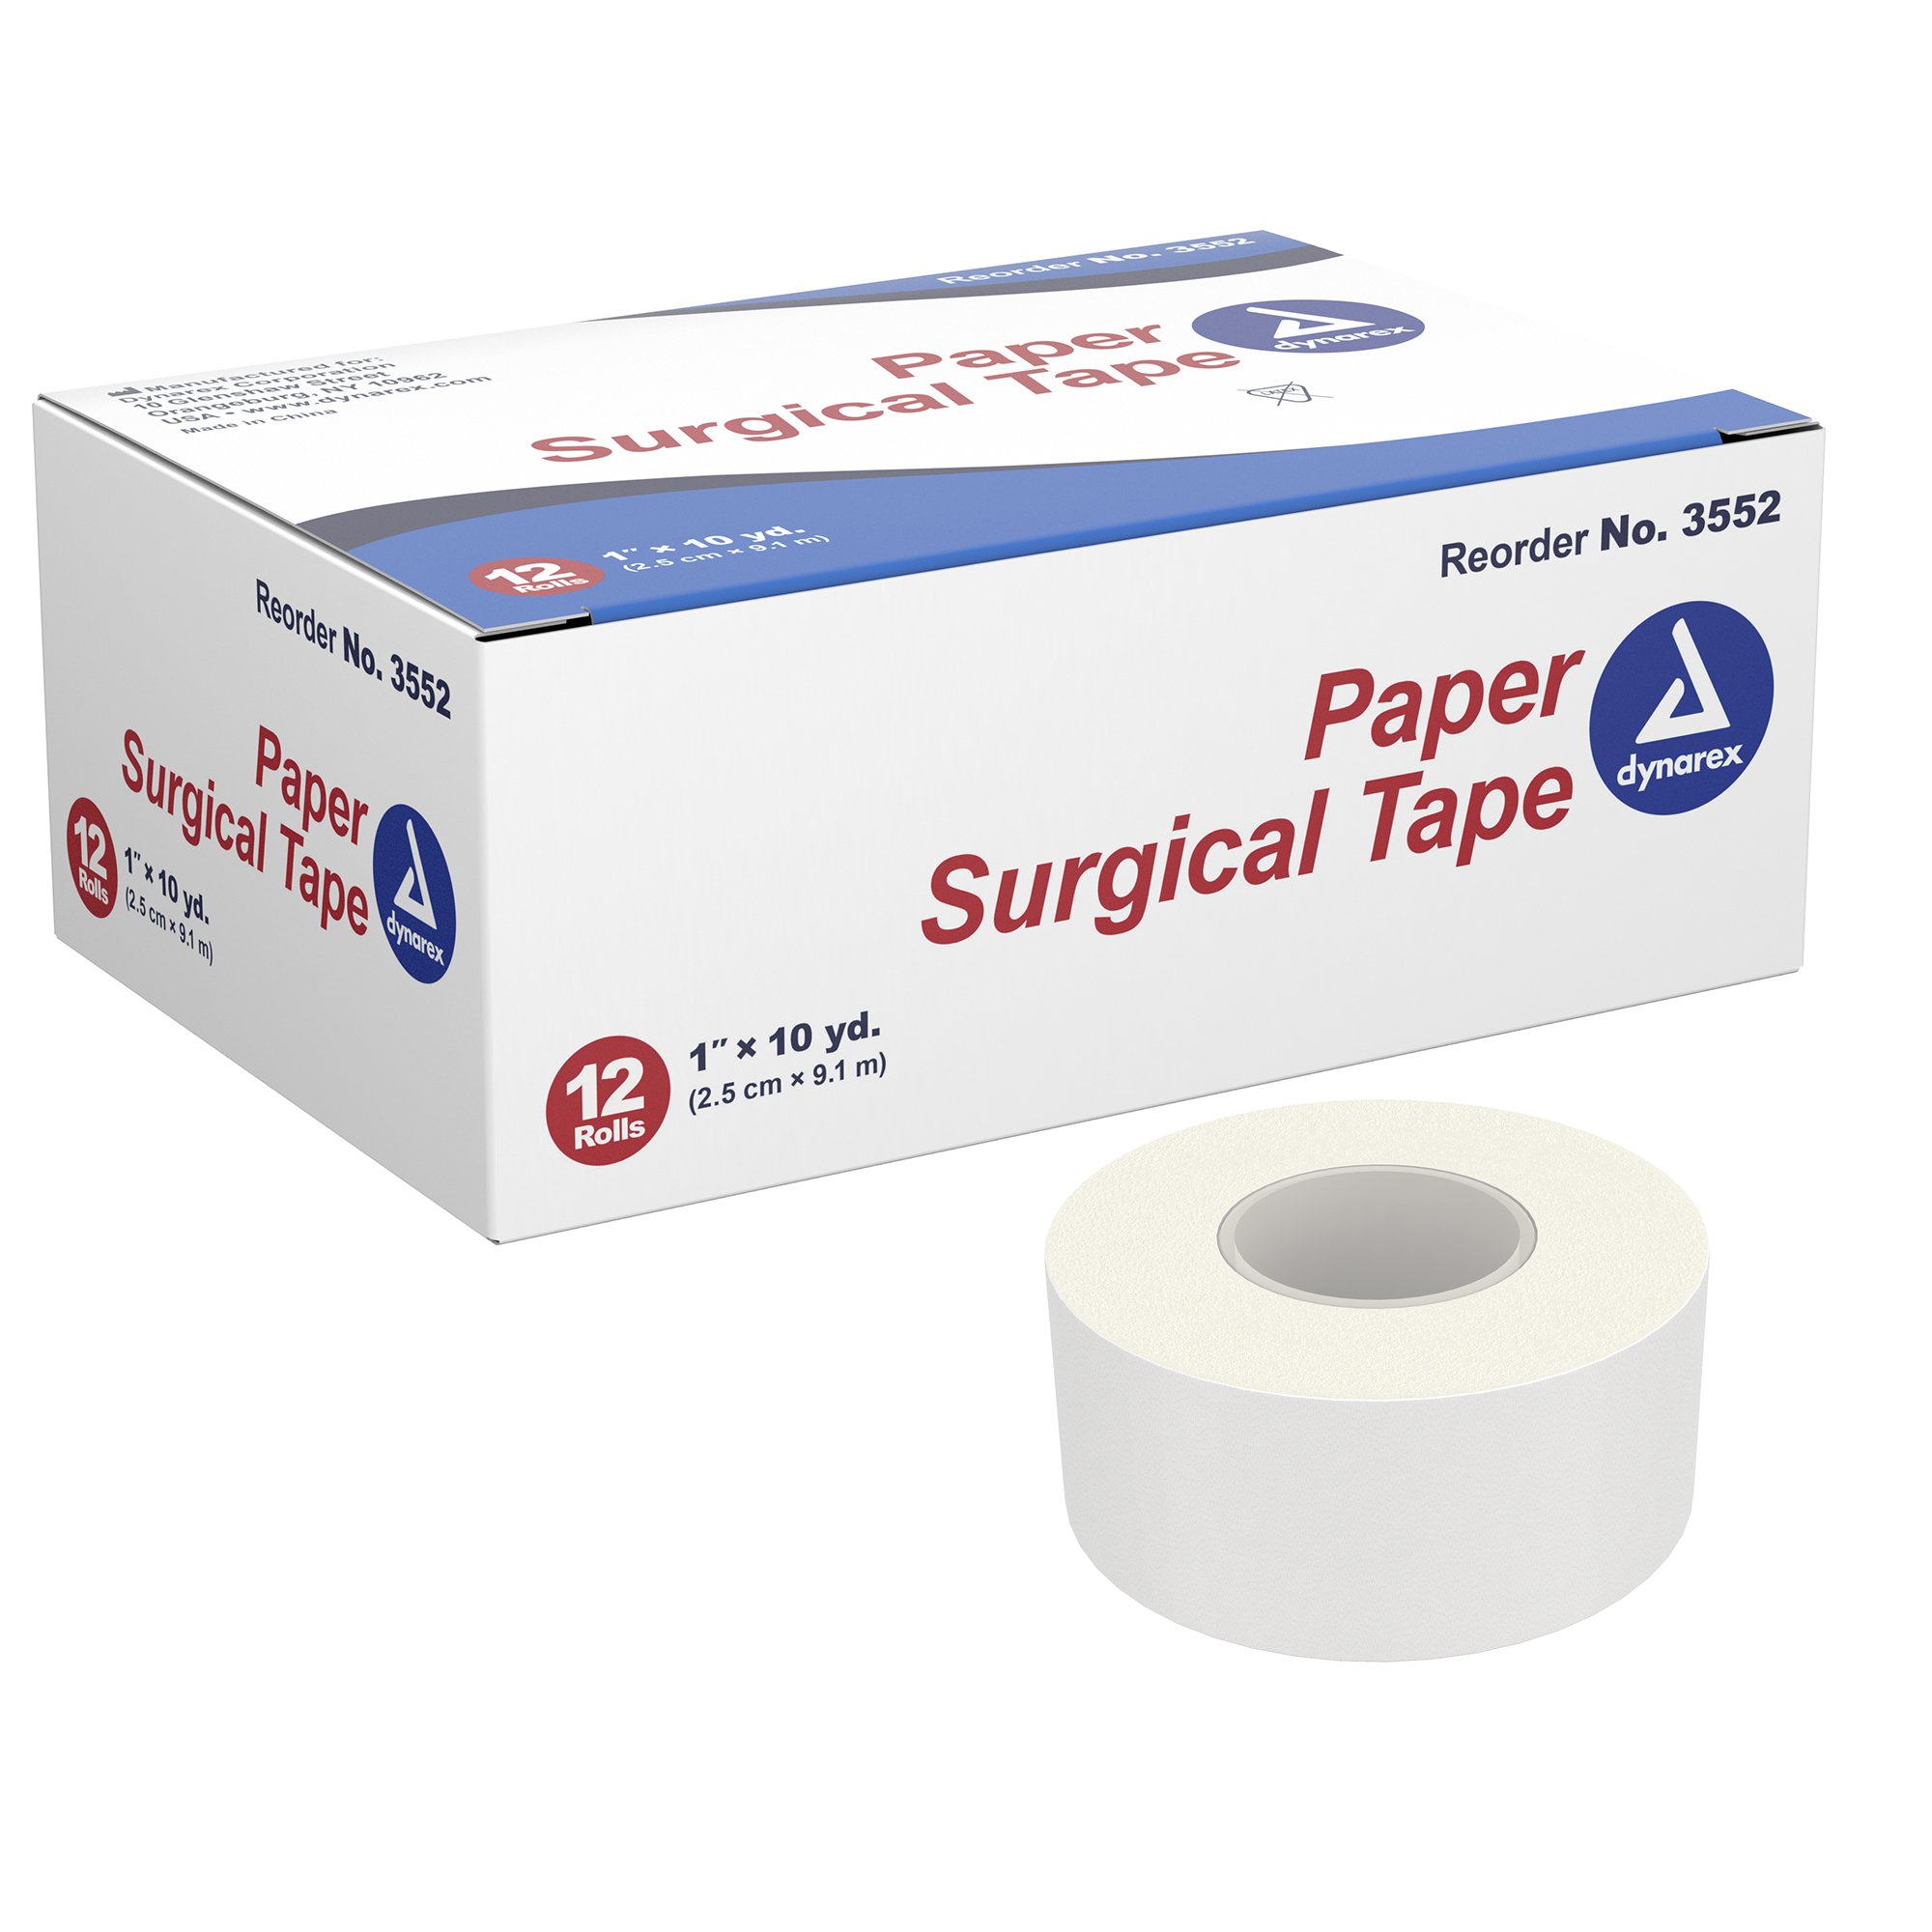 3M Micropore Medical Tape, Non-Sterile Easy Tear Surgical Tape